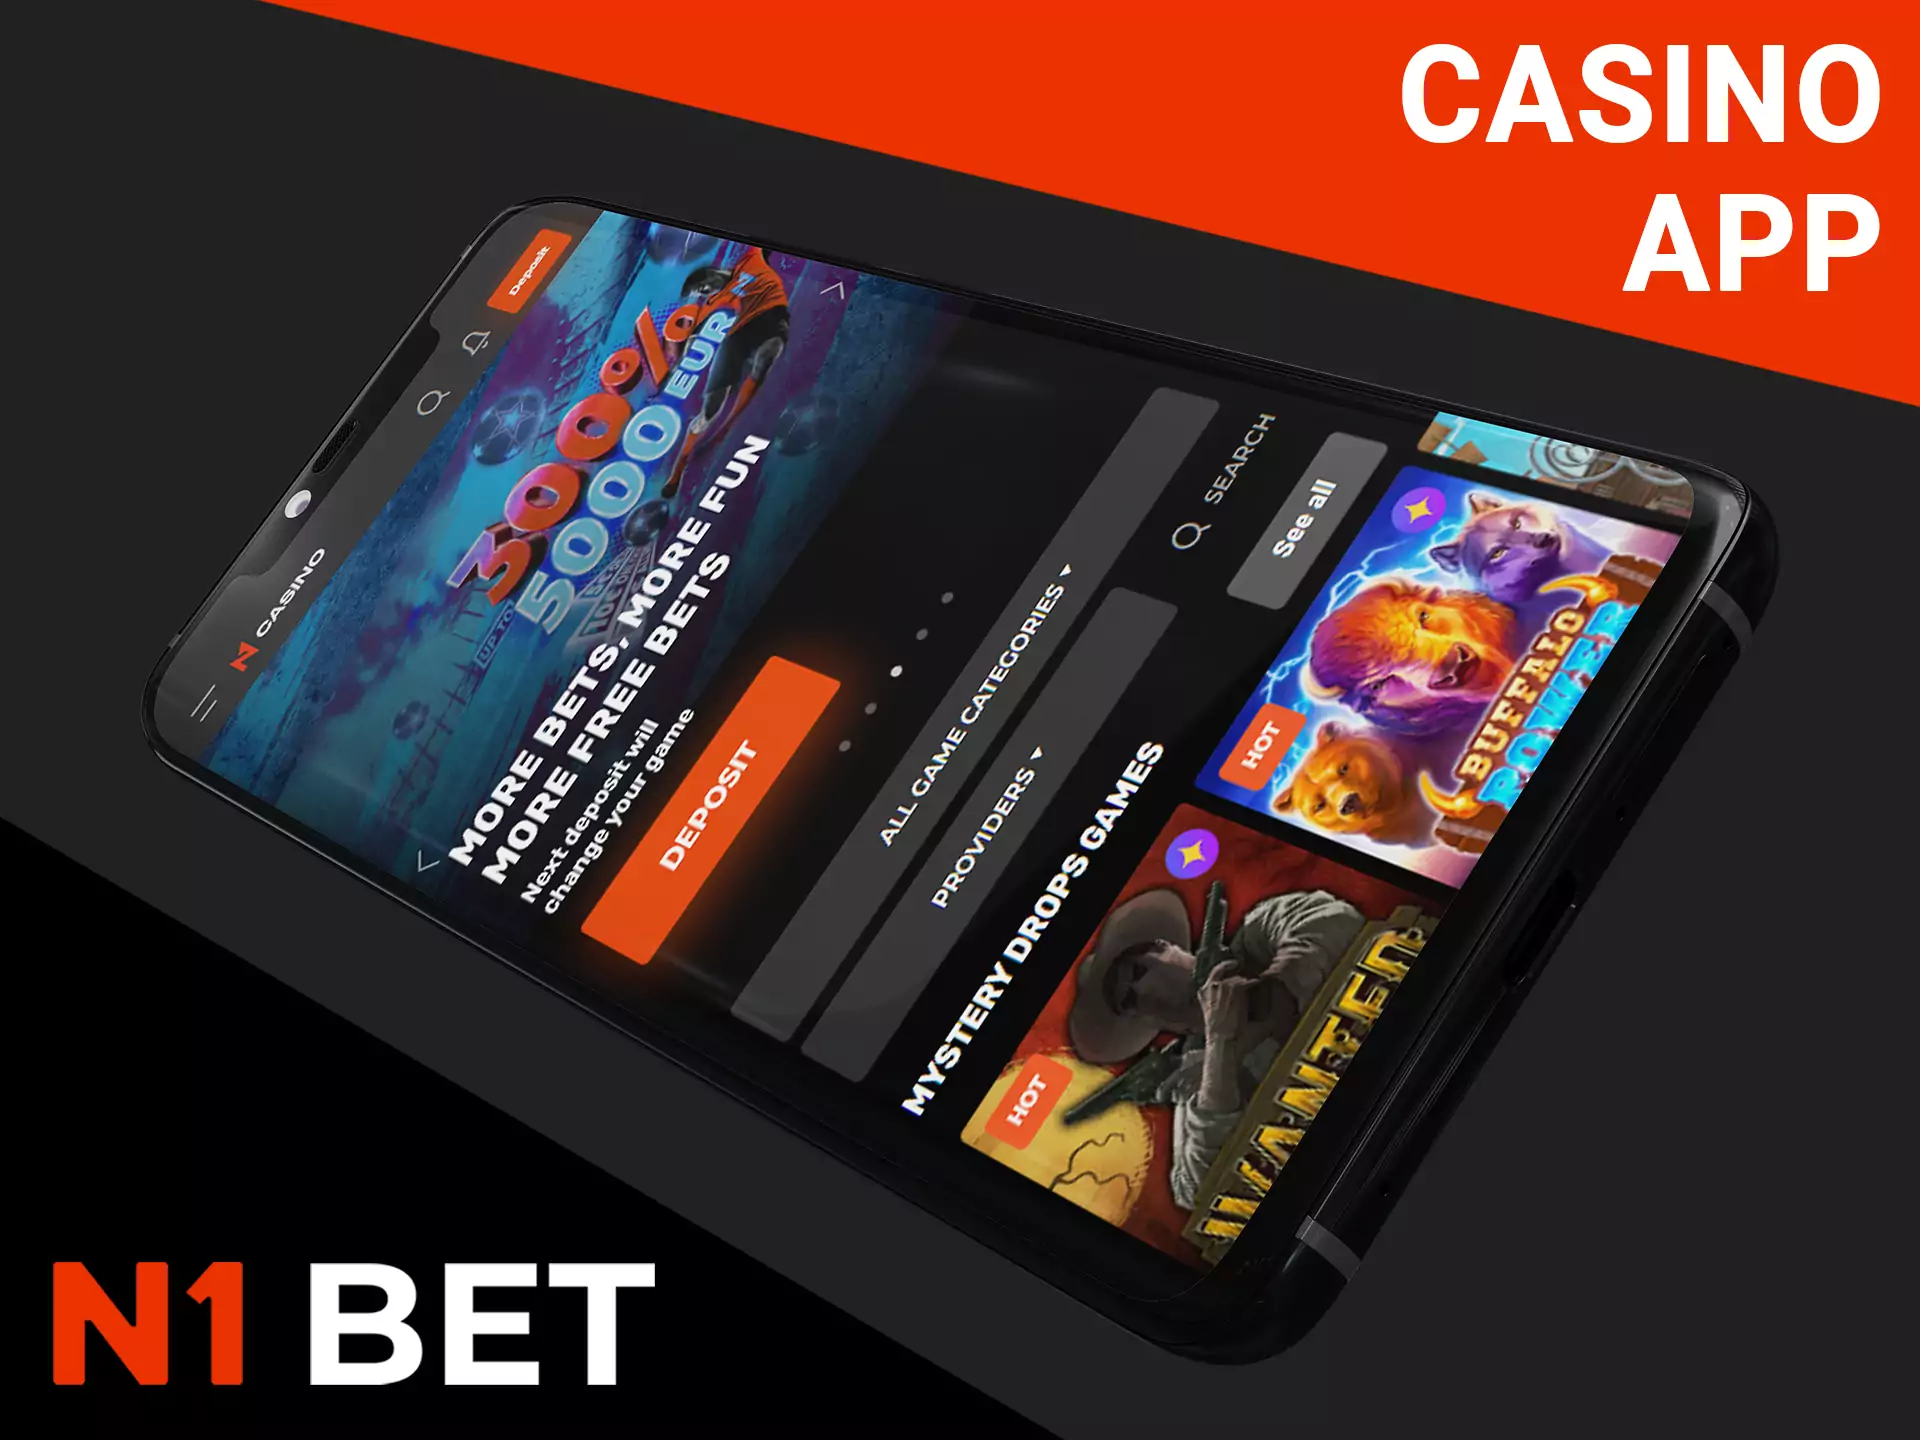 Play casino games with comfort at N1Bet app.